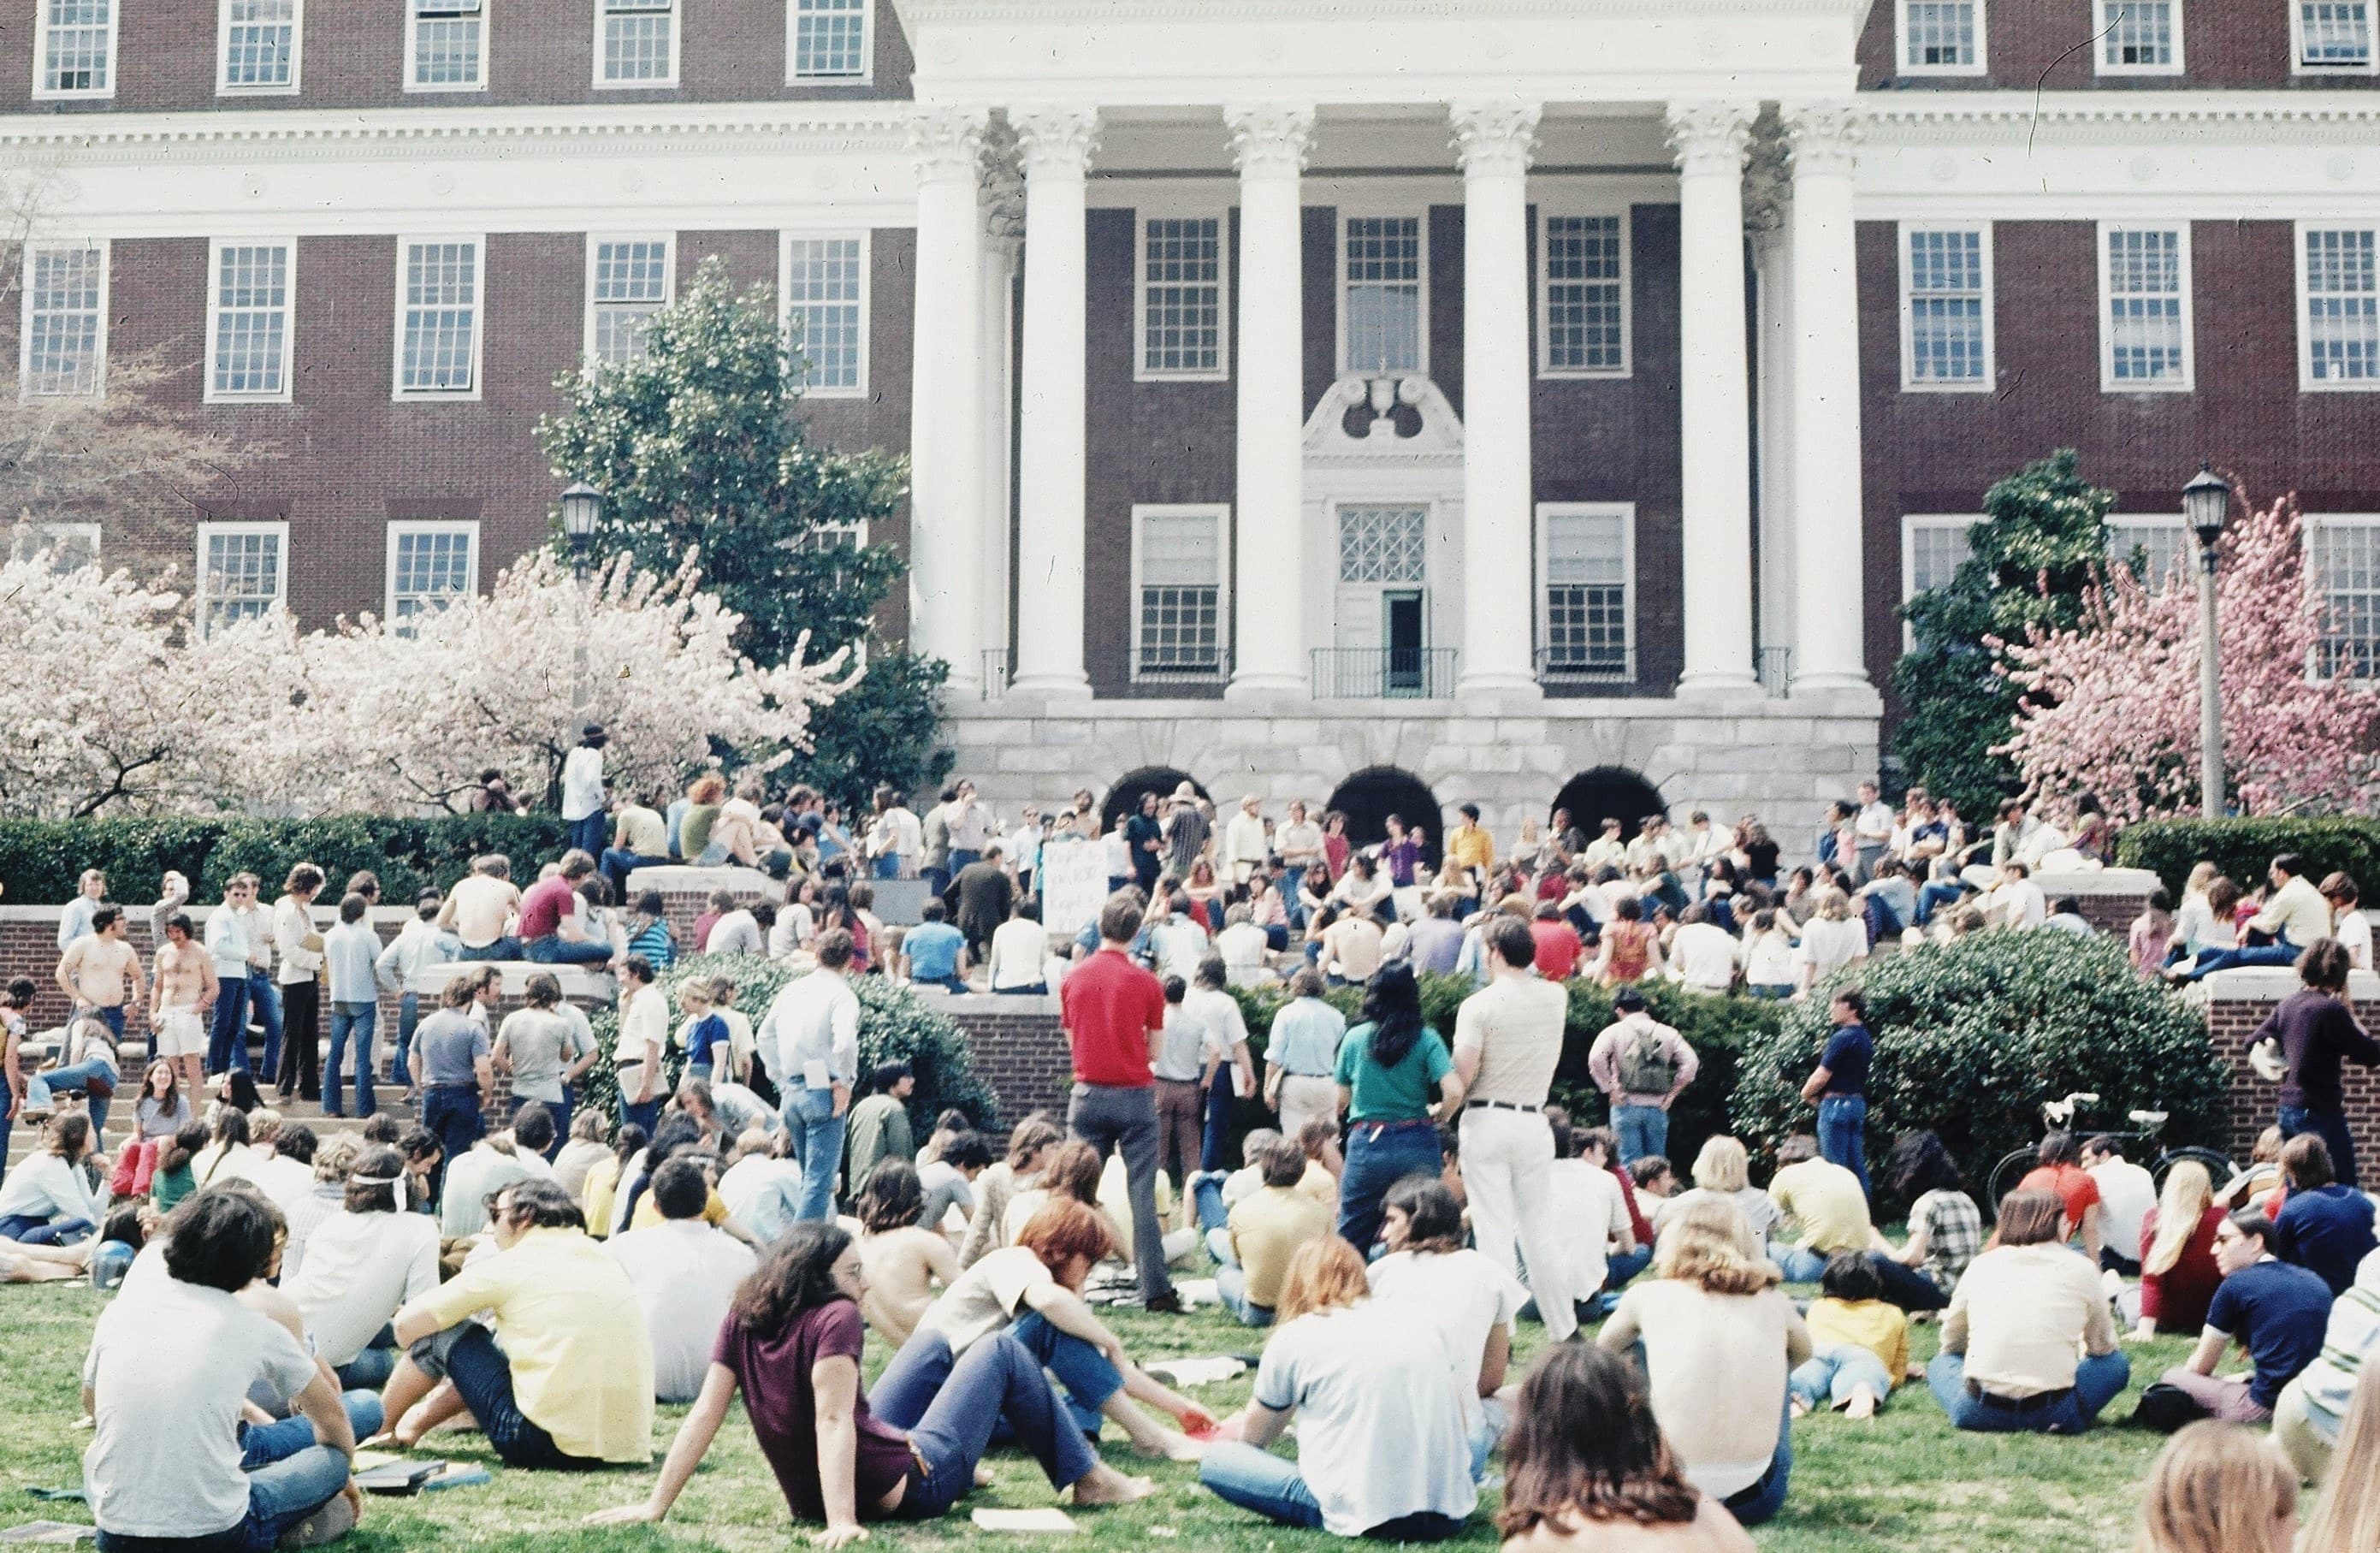 Students attending an anti-war rally on campus in 1971